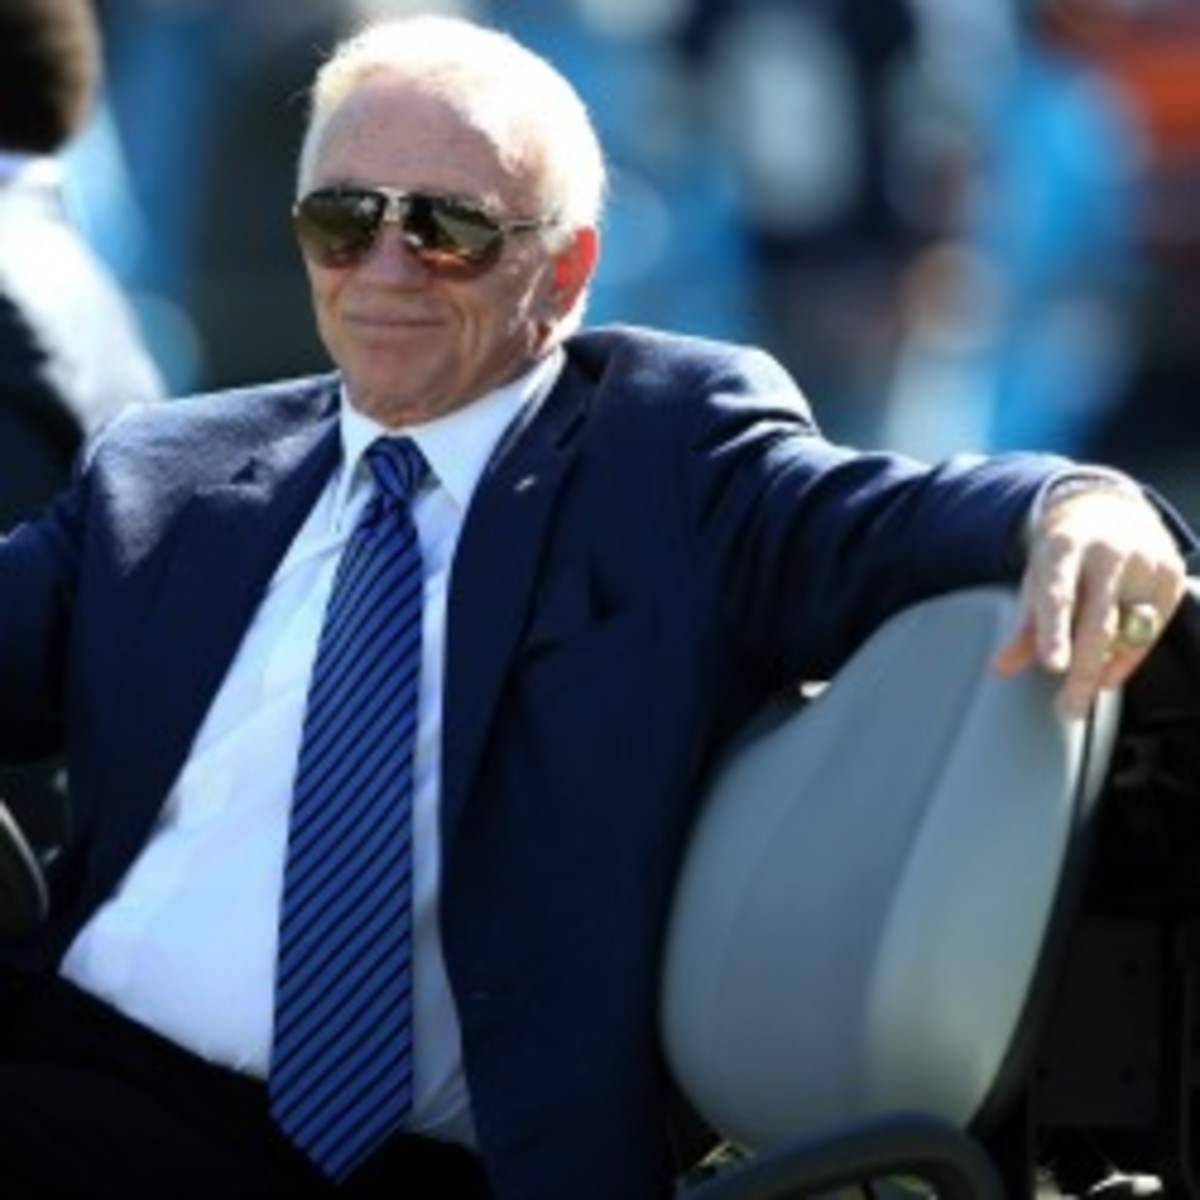 Cowboys owner Jerry Jones says big changes are on the horizon for the team. (Streeter Lecka/Getty Images)